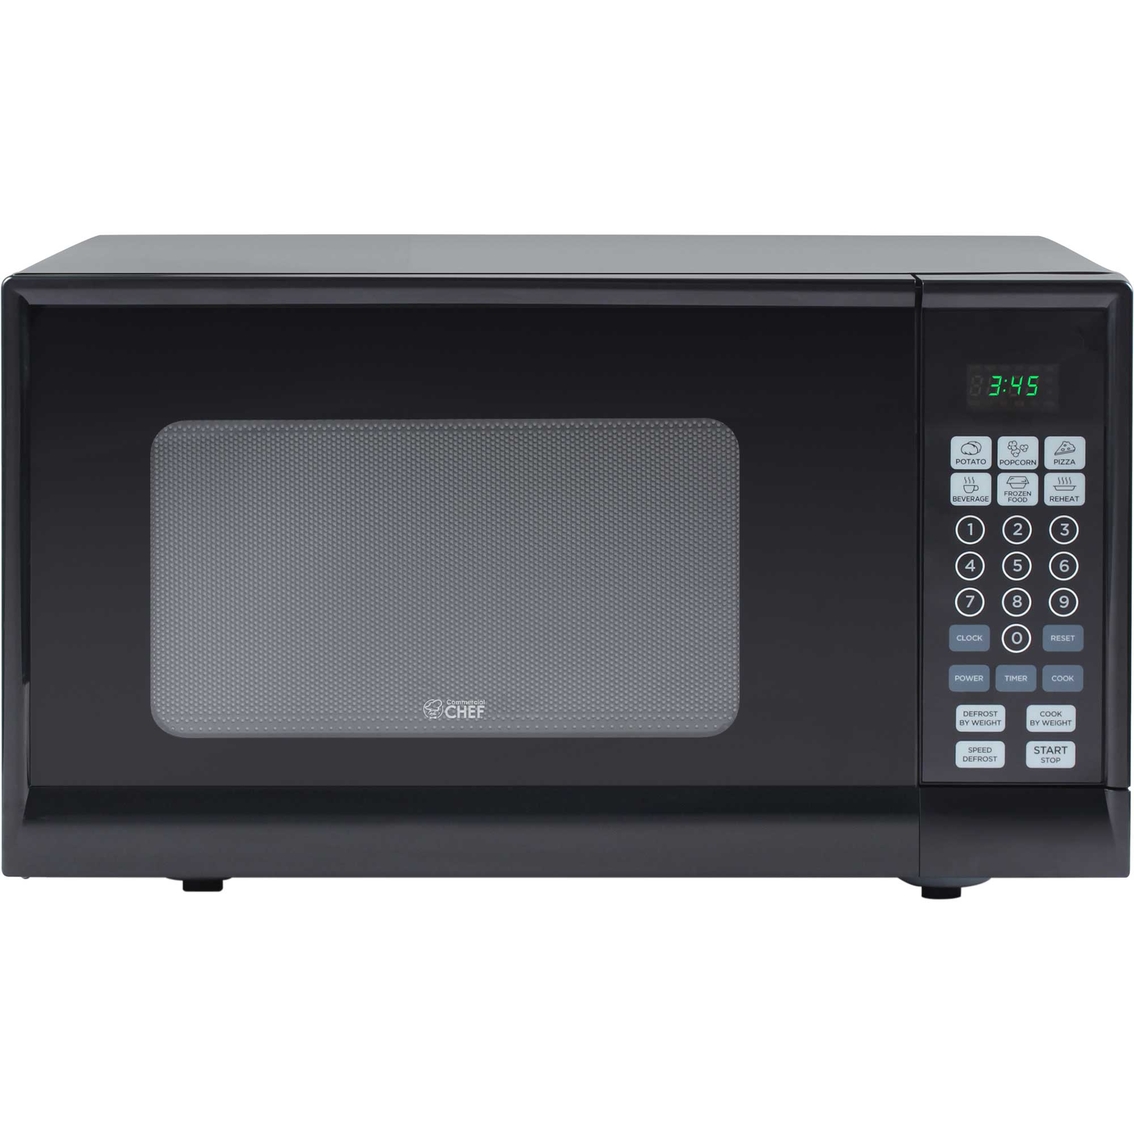 Commercial Chef .9 cu. ft. Counter Top Microwave - Image 2 of 7